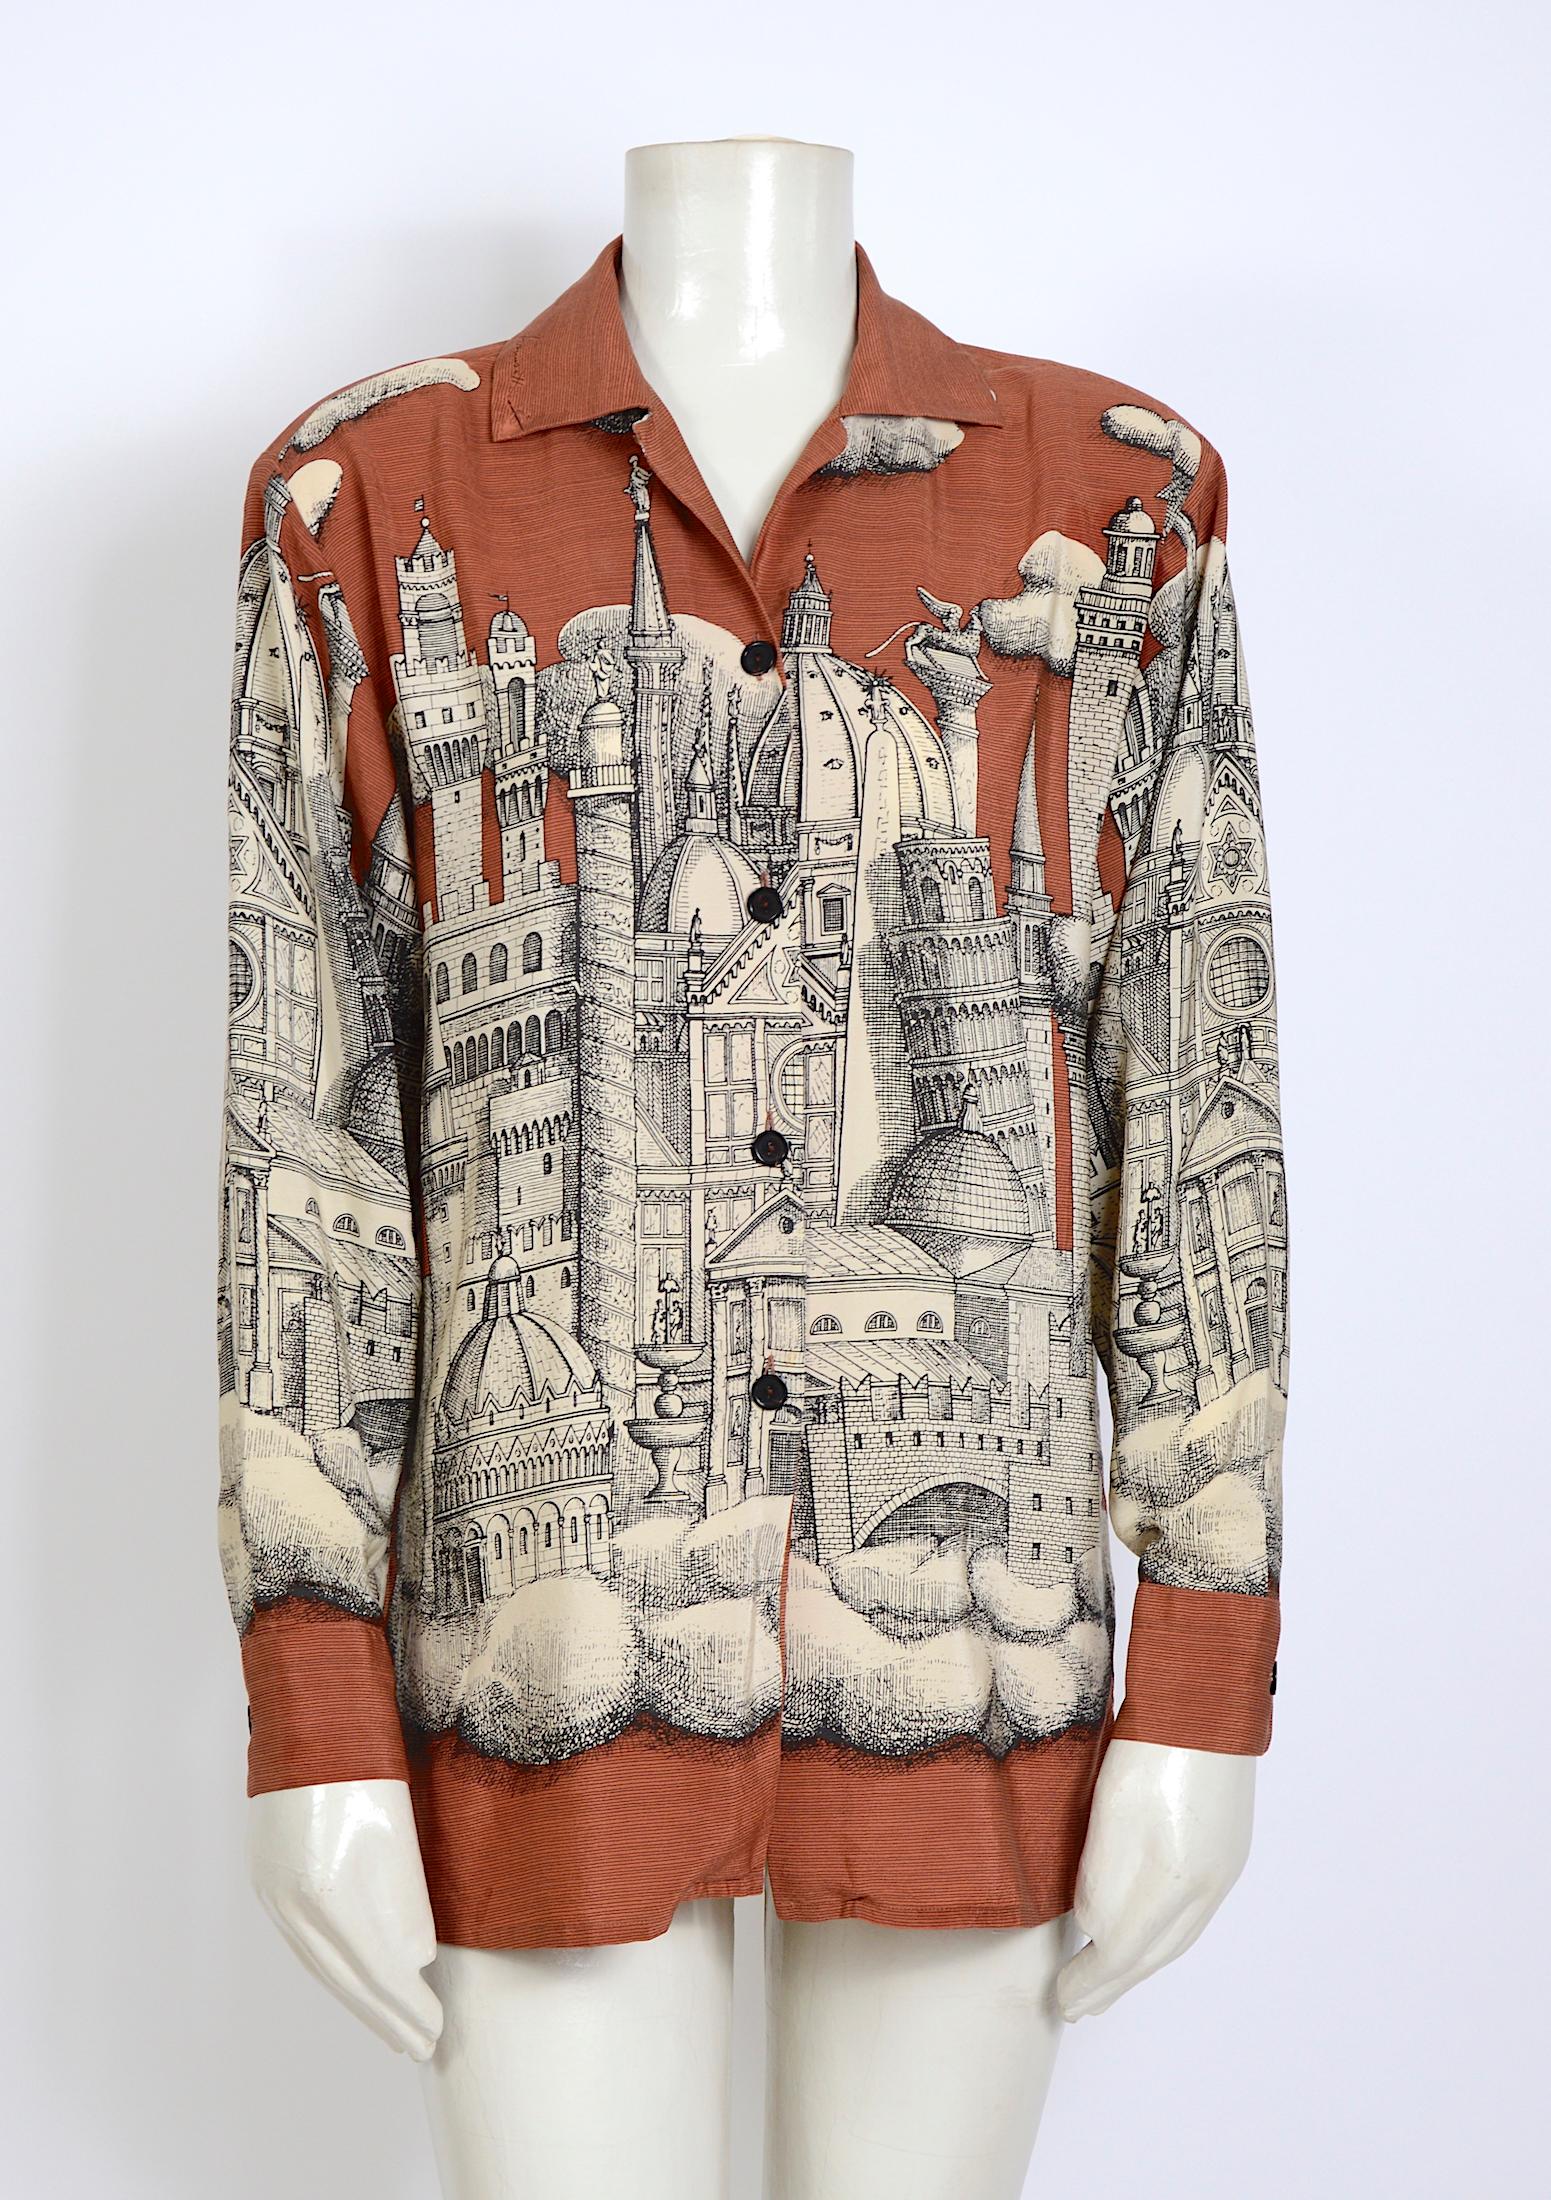 A beautiful vintage original silk print by Fornasetti blouse. Signed on the collar.
Beautiful condition
Made in Italy - Size 42 - 100% silk
Please go by measurements that are taken flat
Sh to Sh 17,5inch/44cm - Ua to Ua 19,5inch/49,5cm(x2) - Waist